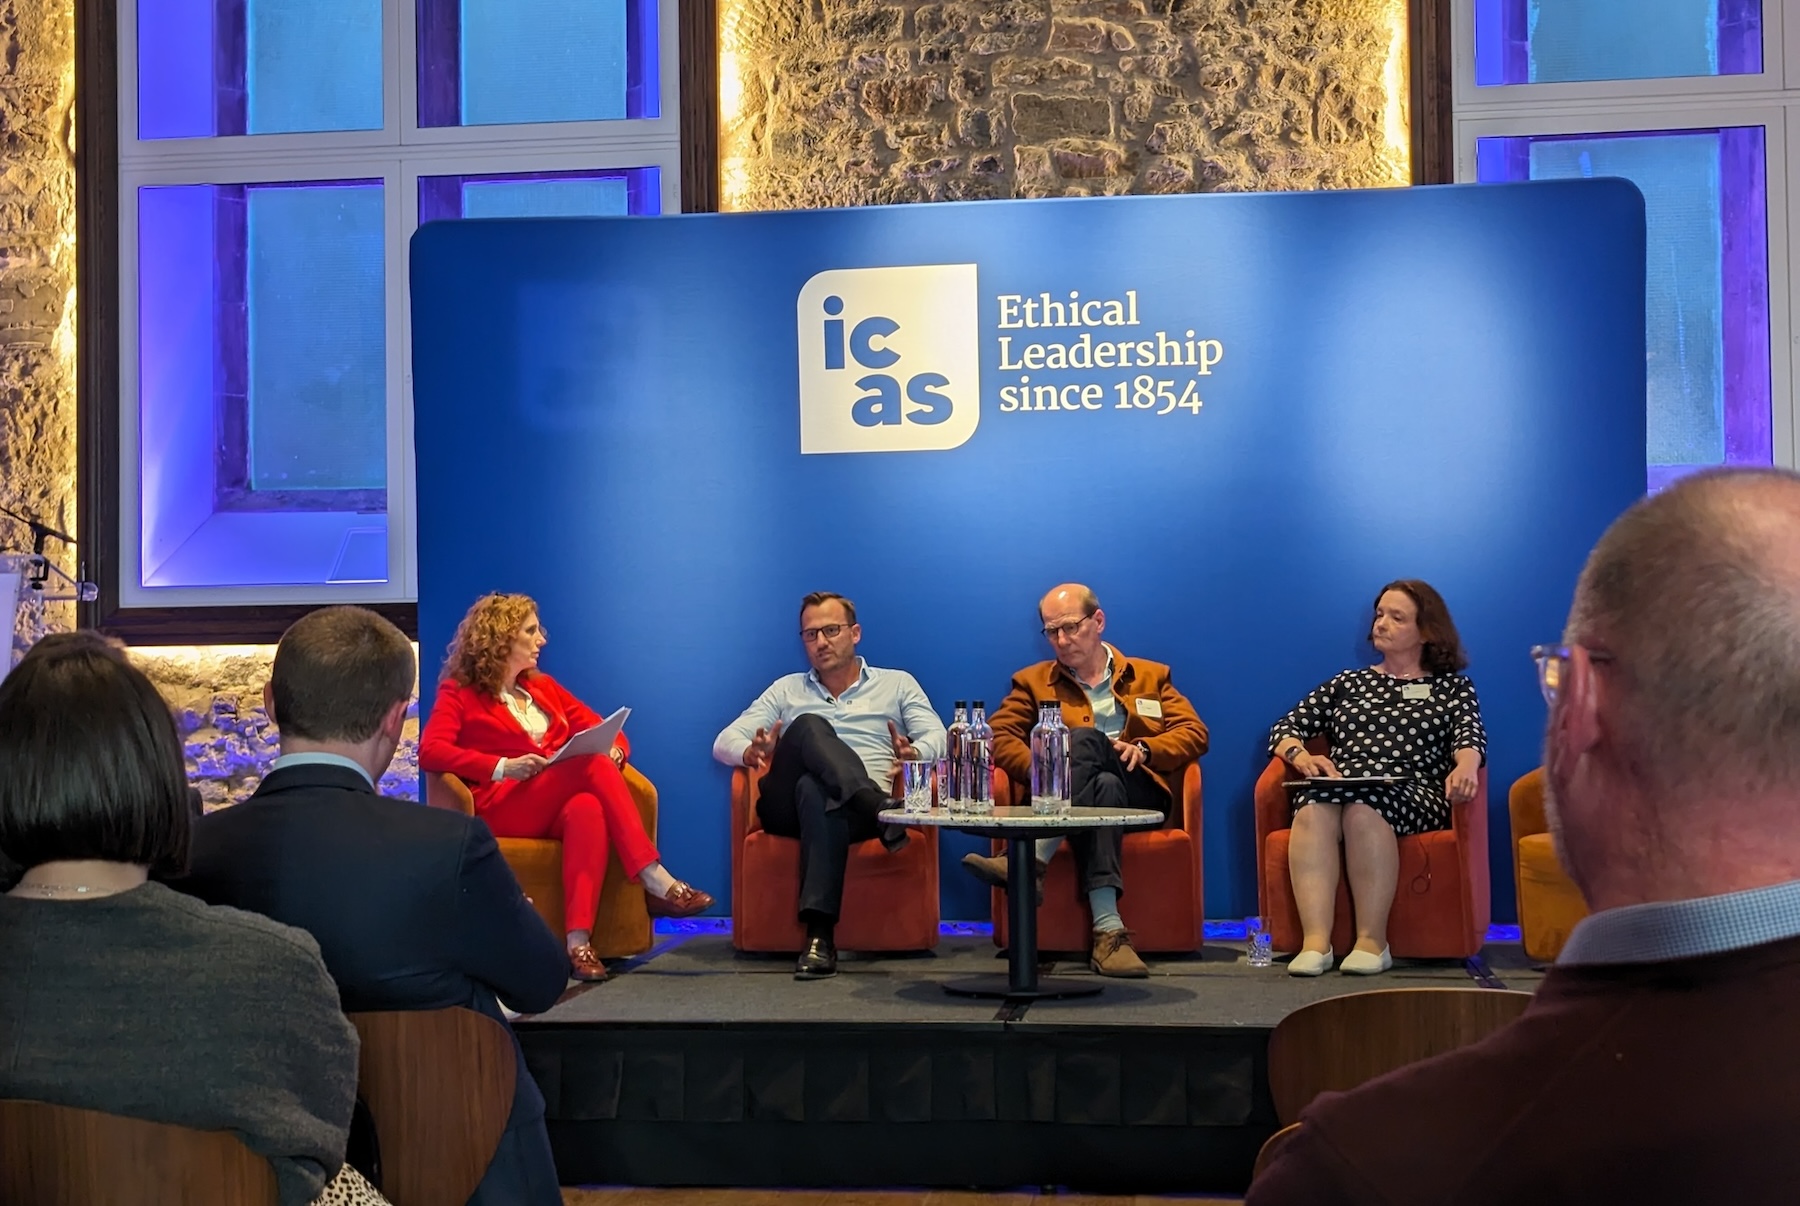 ICAS sustainability summit brings together regulatory experts and business leaders